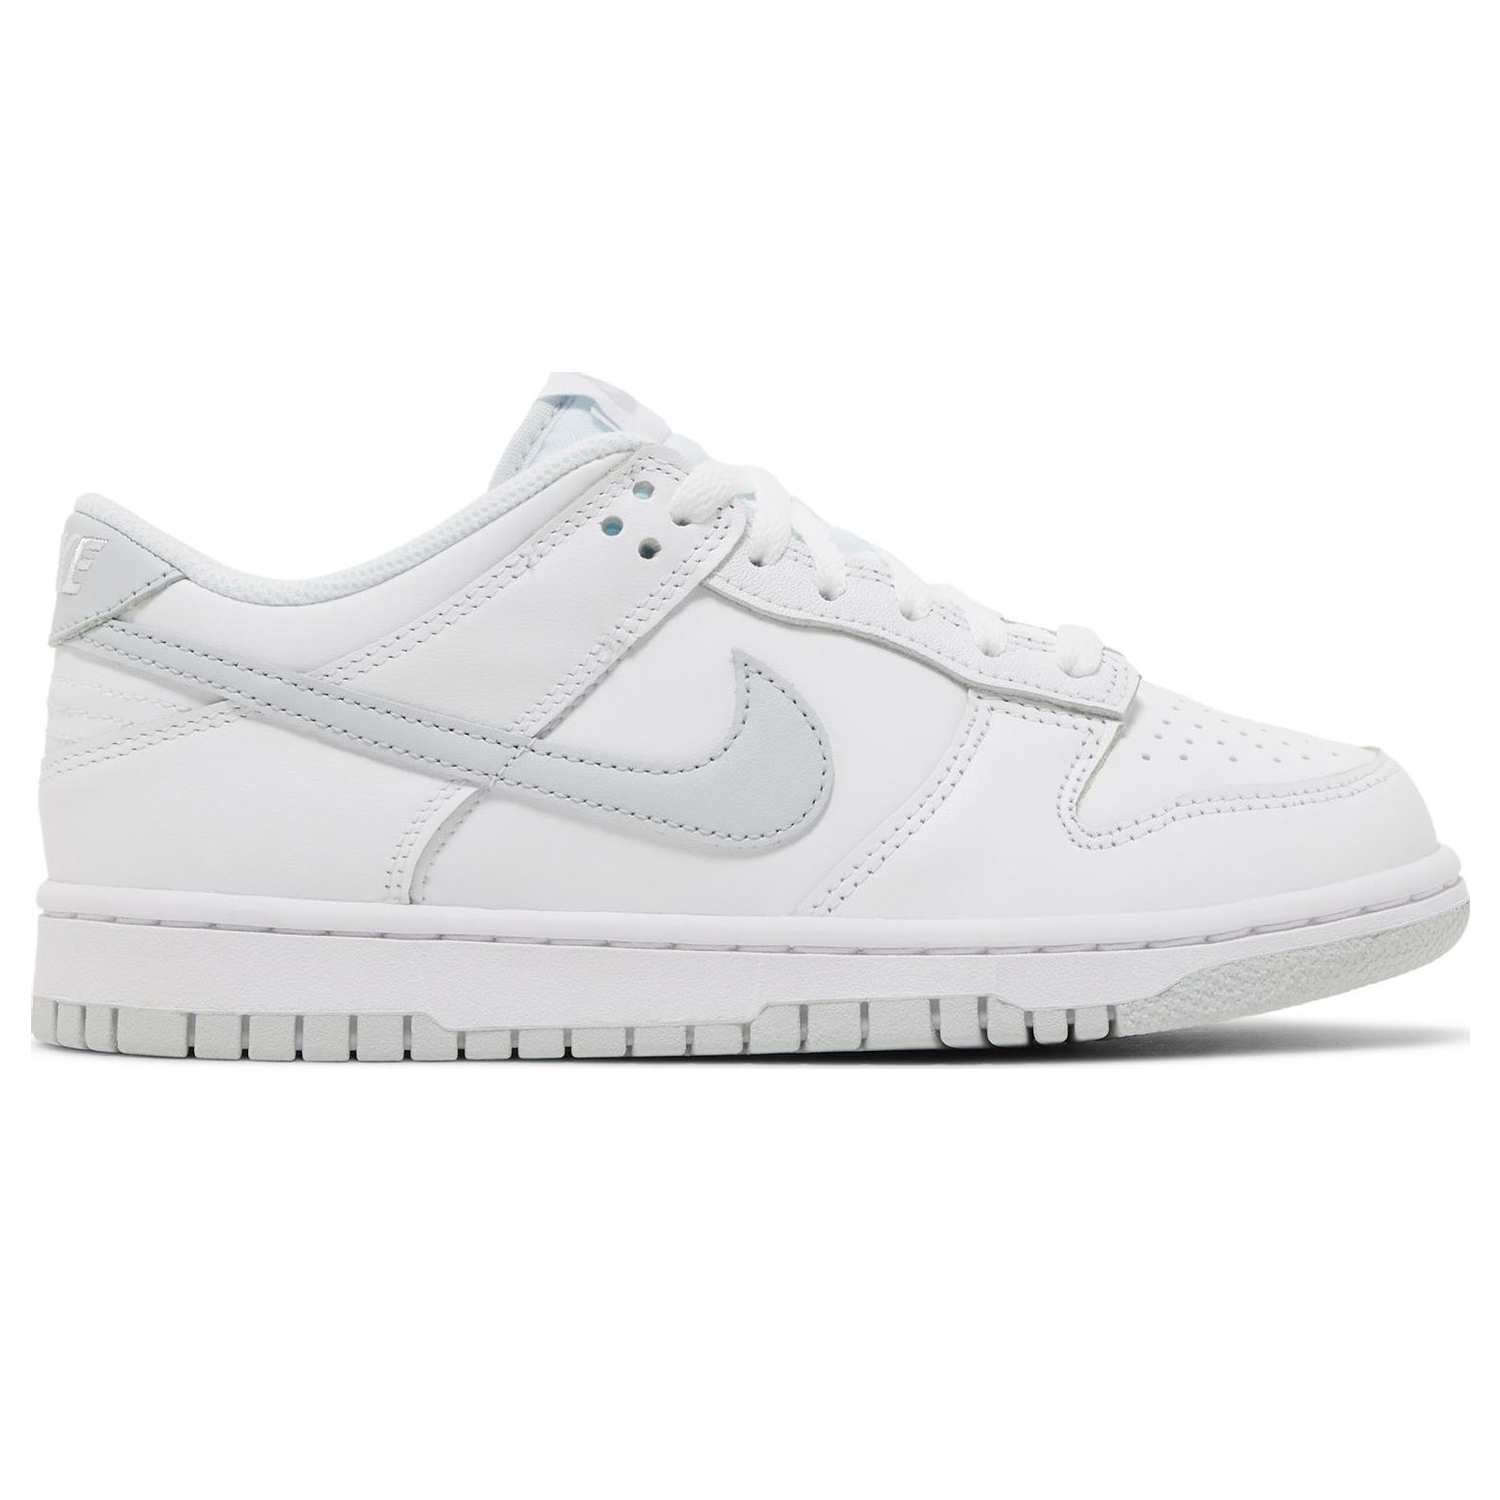 Кроссовки Nike Dunk Low GS 'Pure Platinum', Белый кроссовки nike dunk high gs summit white pure platinum белый